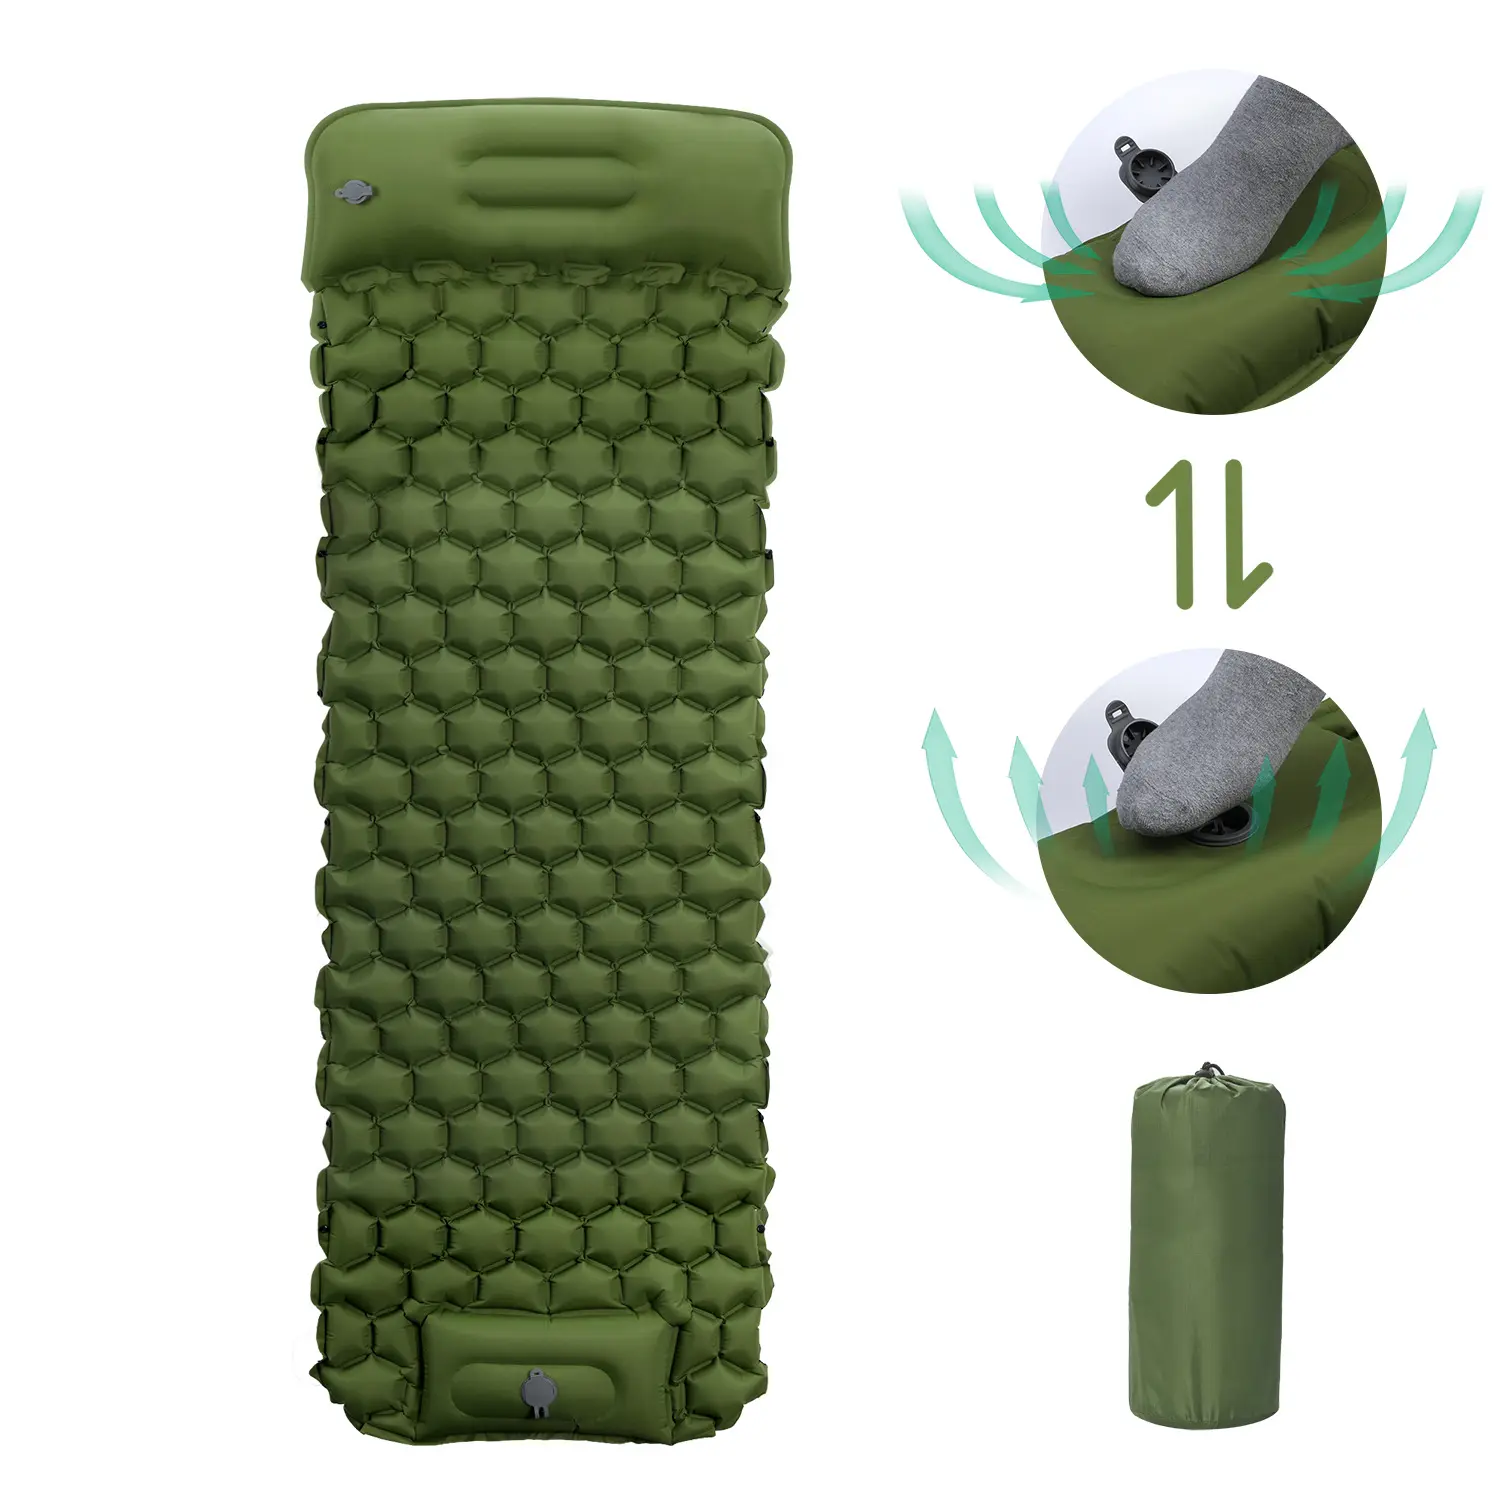 Outdoor Camping mat Built-in Foot Pump Inflatable Sleeping mat pad self inflating bed camping mat for hiking travel